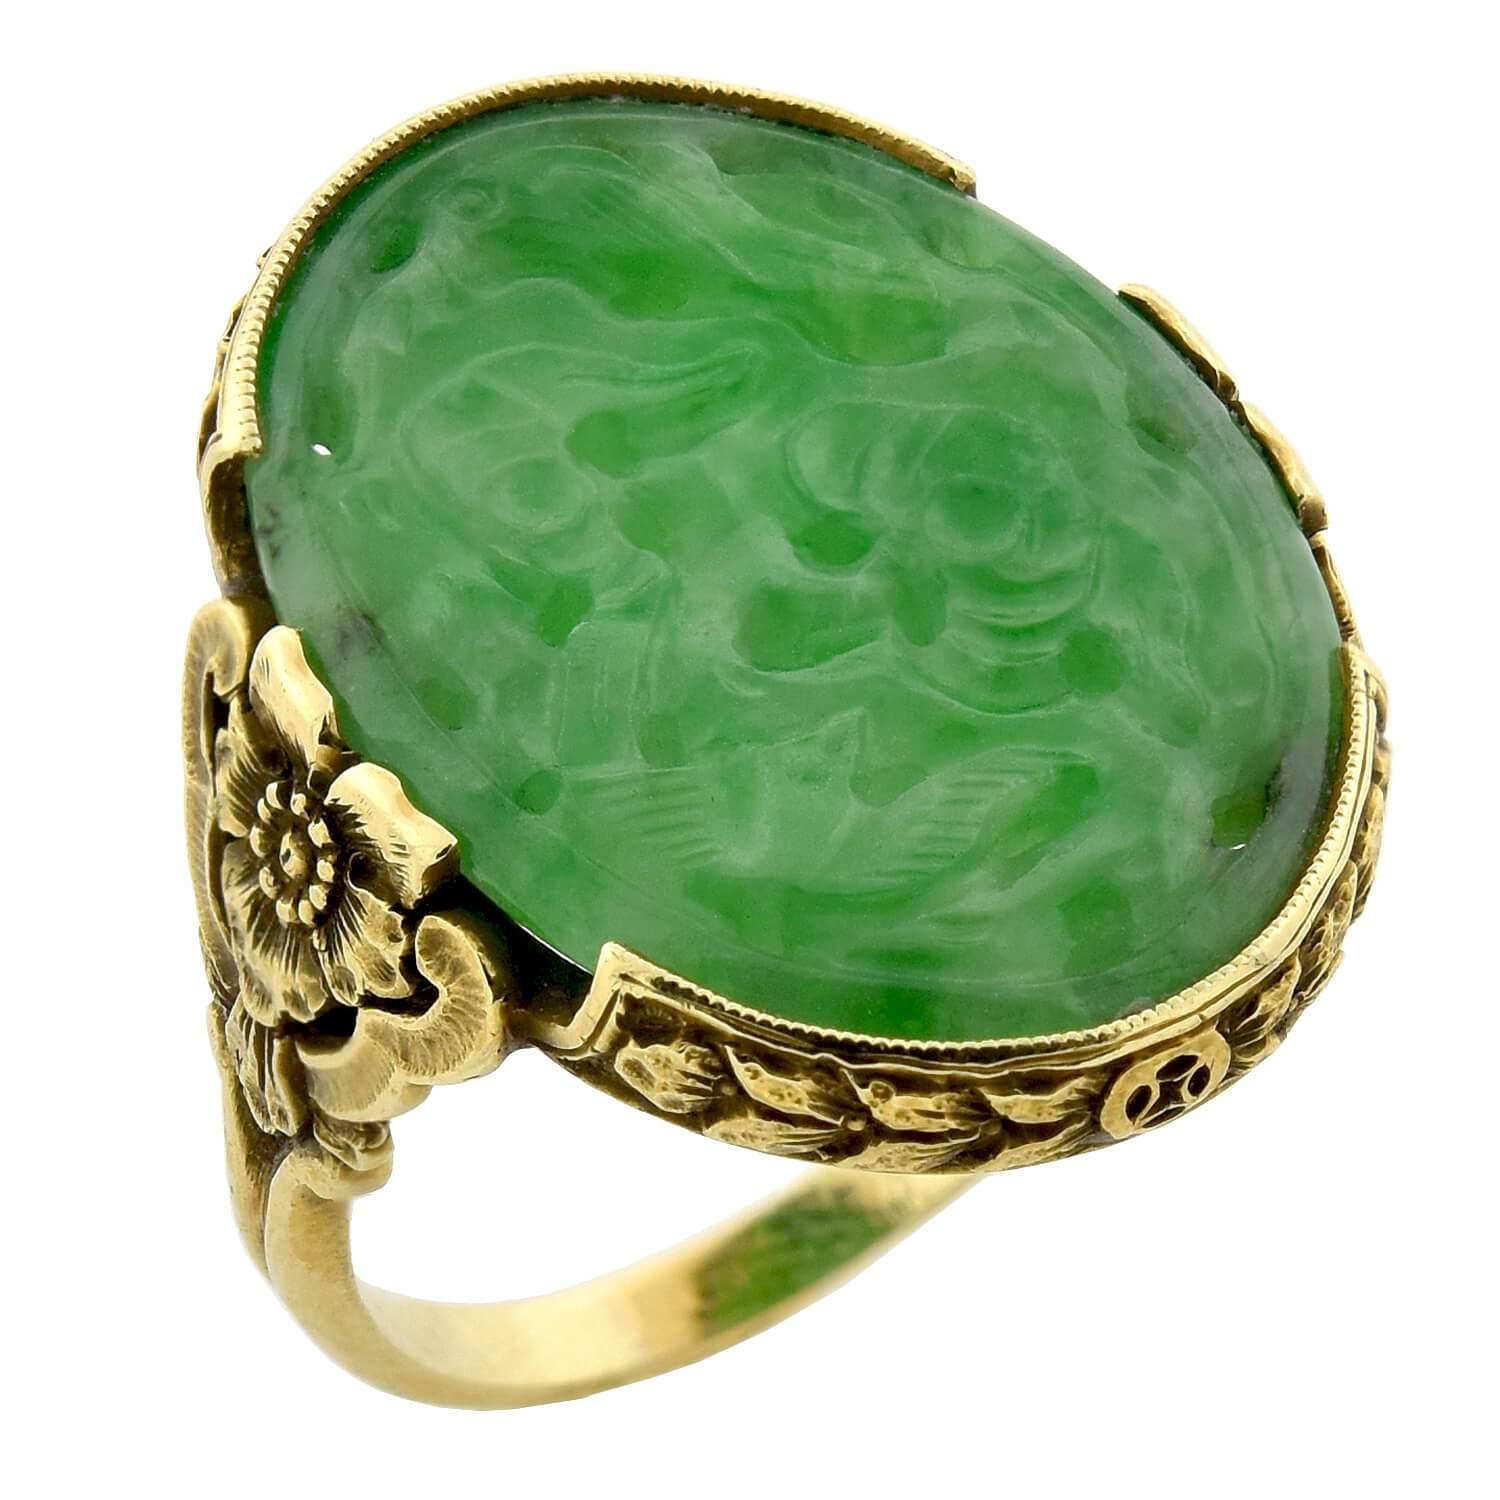 A stunning jadeite ring from the Art Deco (ca1920s) era! This beautiful piece is crafted in vibrant 18kt yellow gold and features an artistic oval-shaped jadeite plaque resting in the center of a decorative floral mounting. The natural, untreated